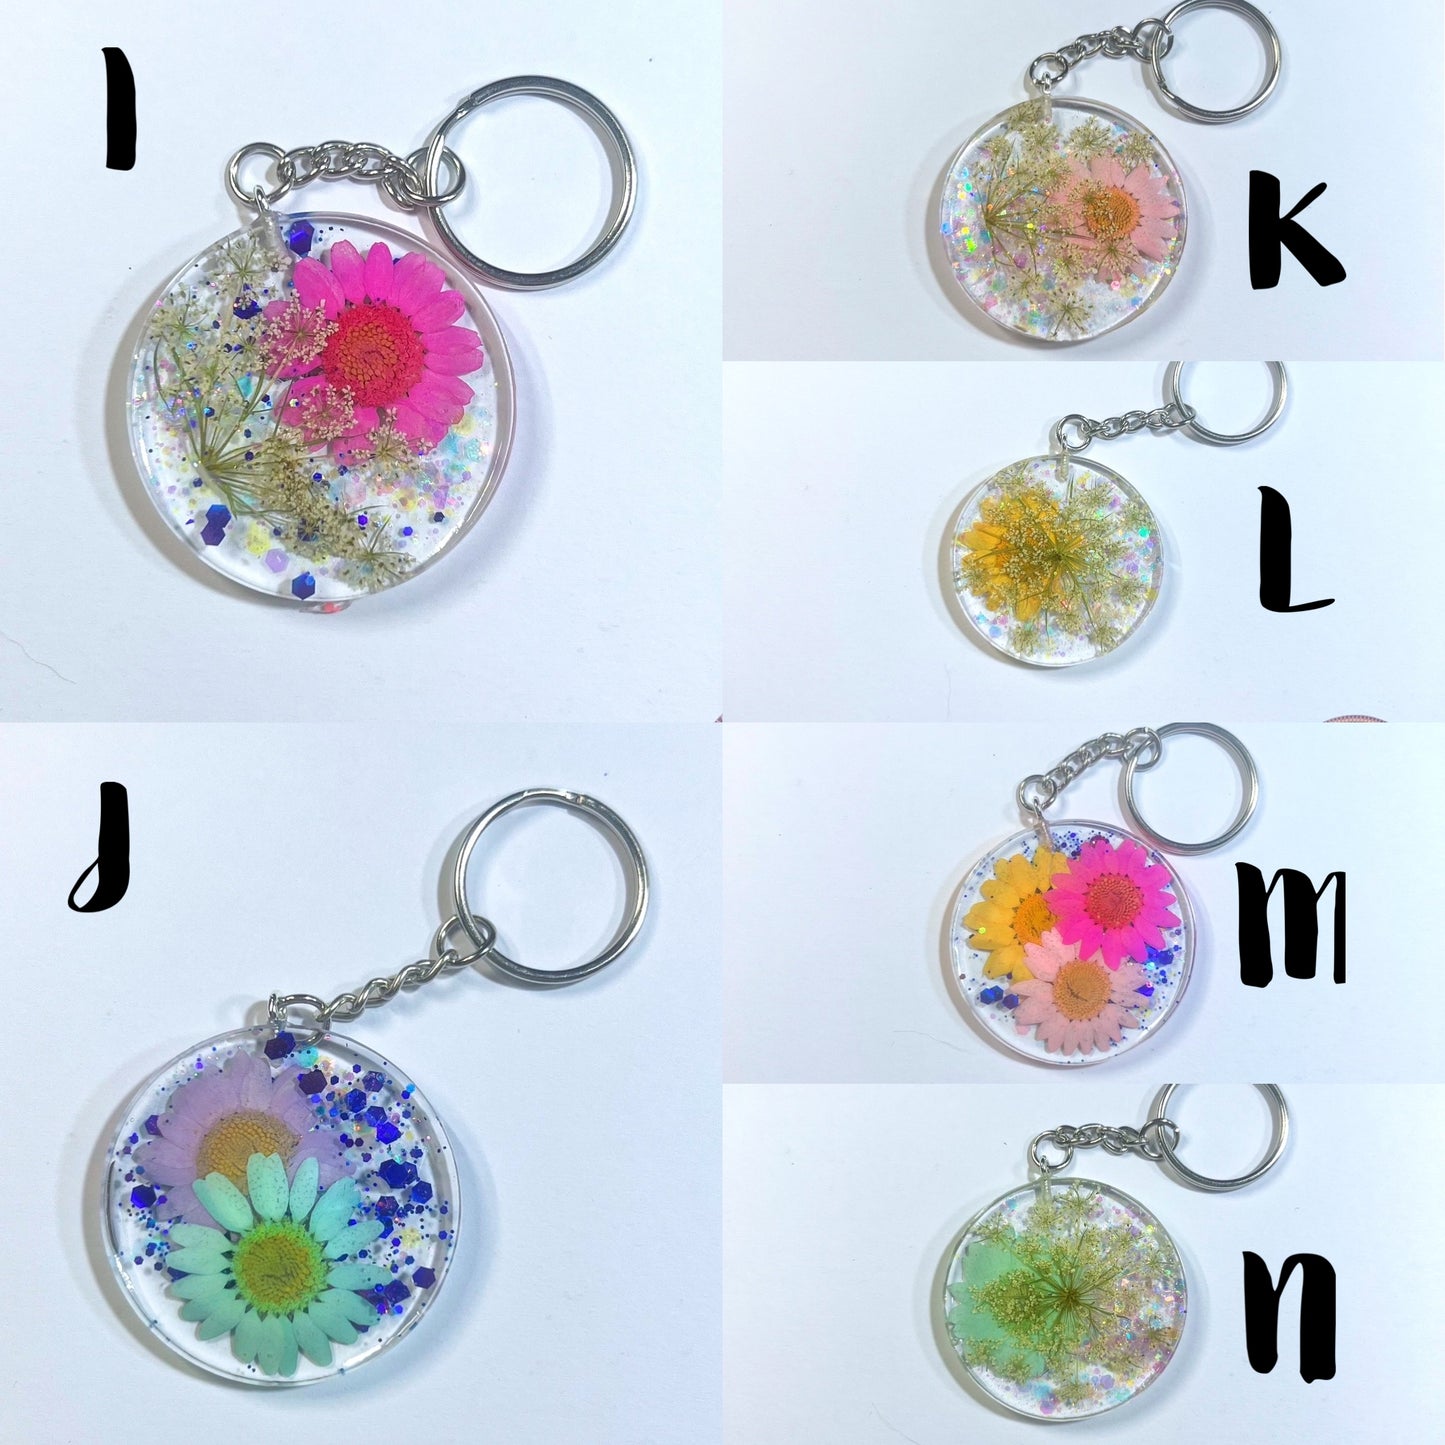 Pressed Flower Customizable Name Keychains